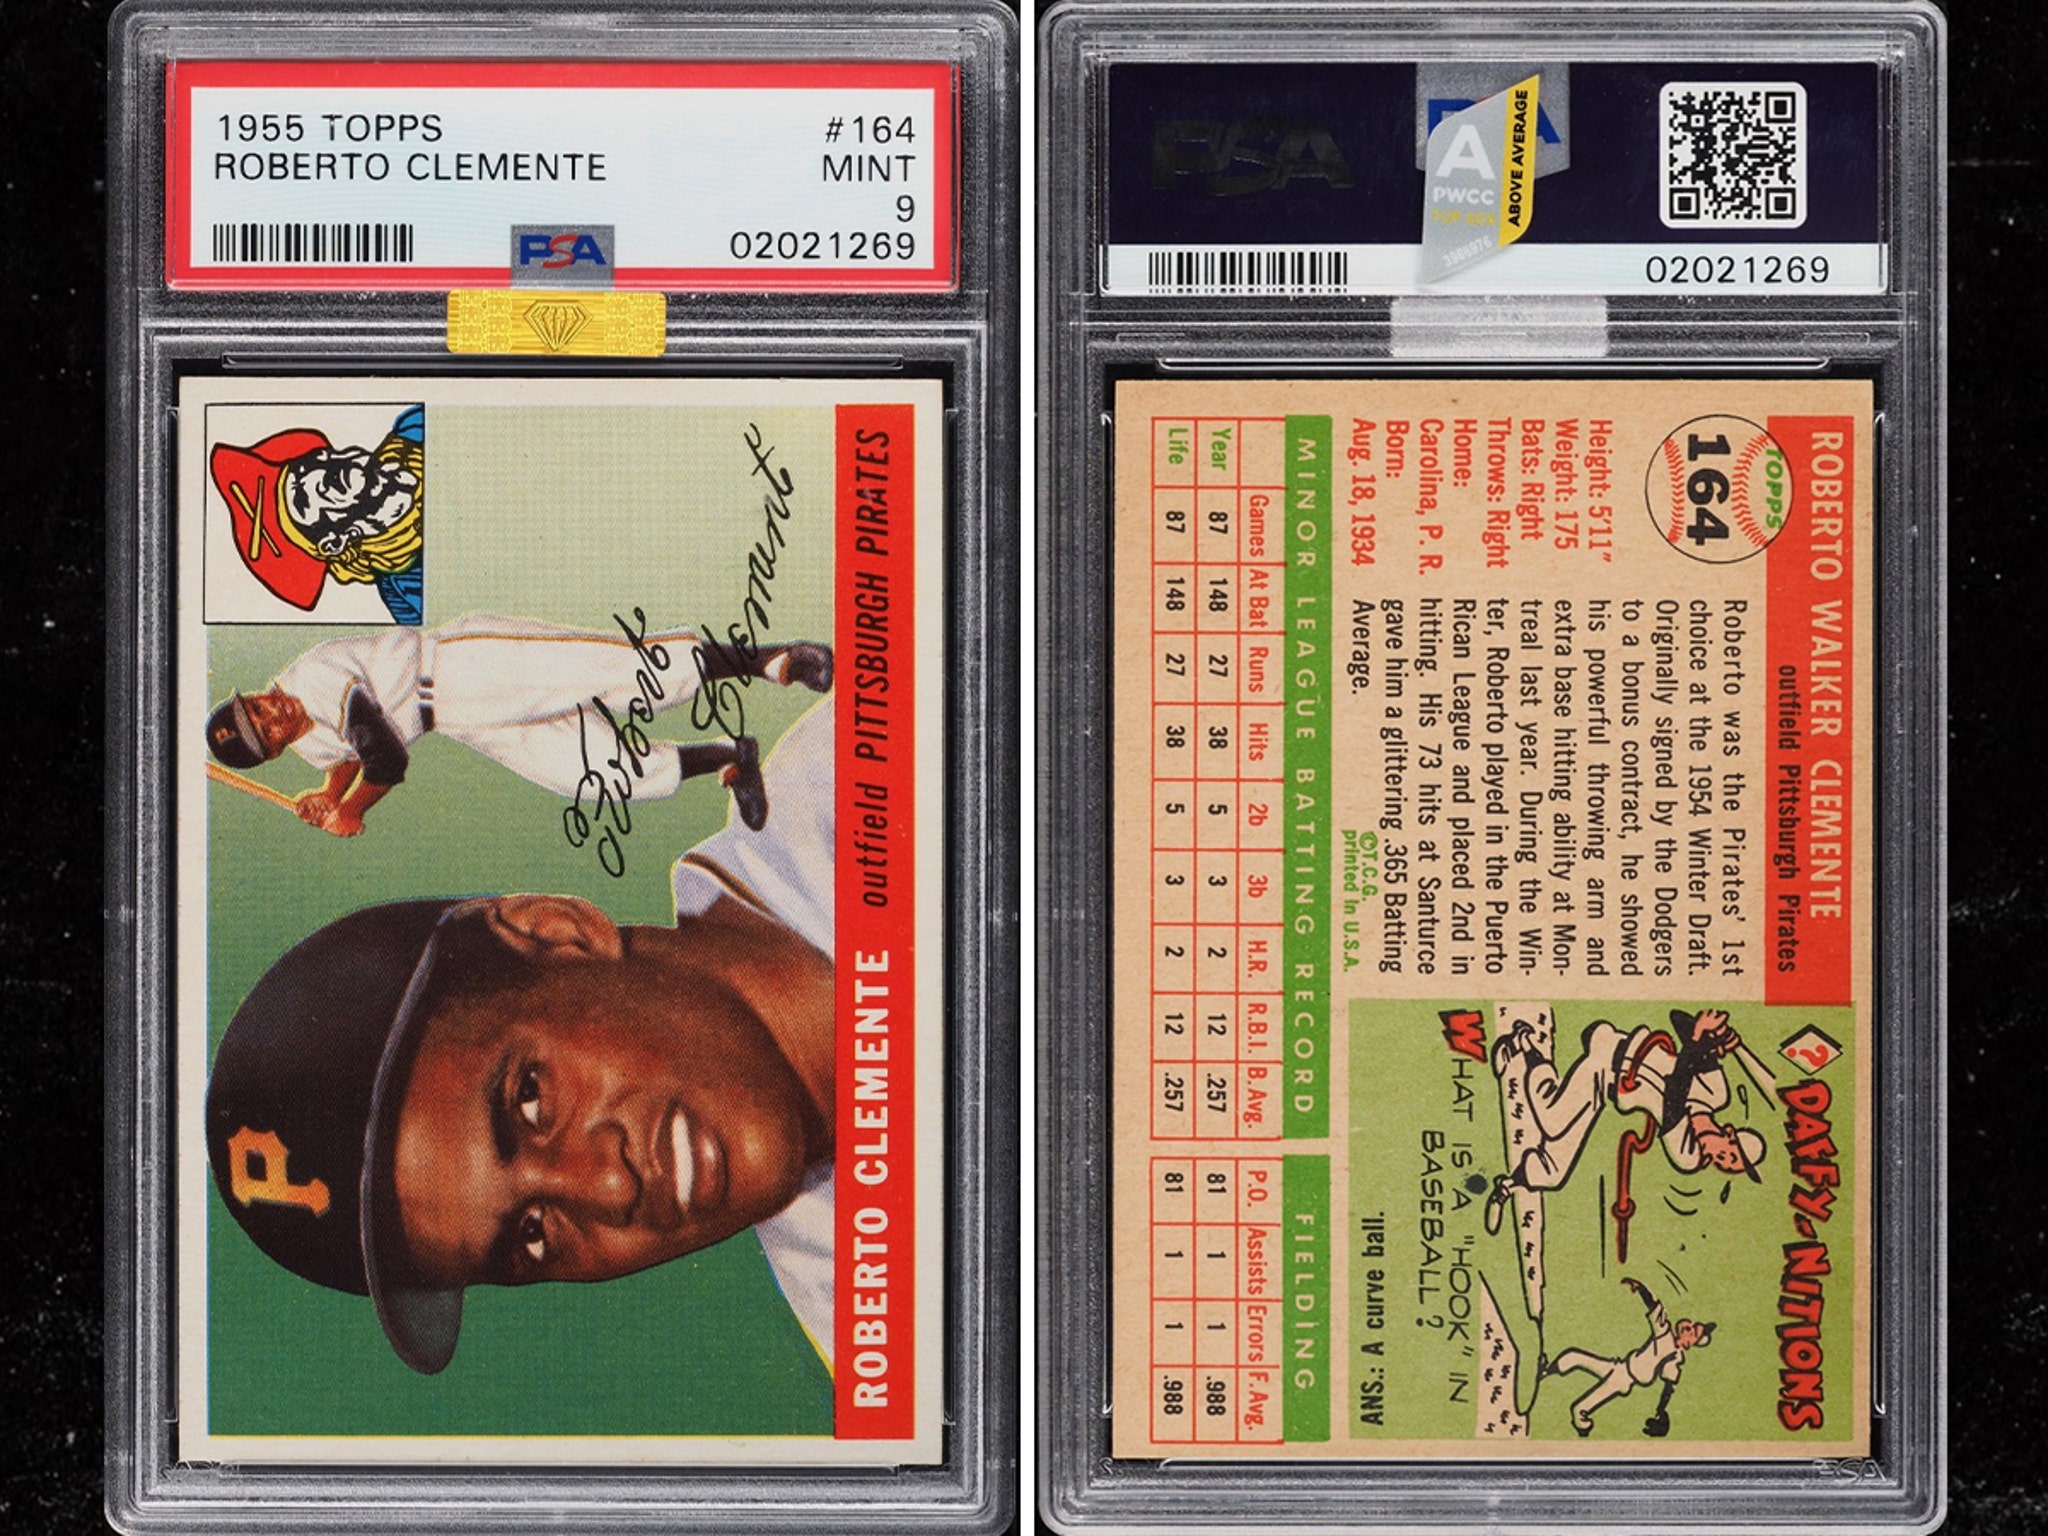 Roberto Clemente 1955 Topps Rookie Card Sells For Over $1 Million At Auction